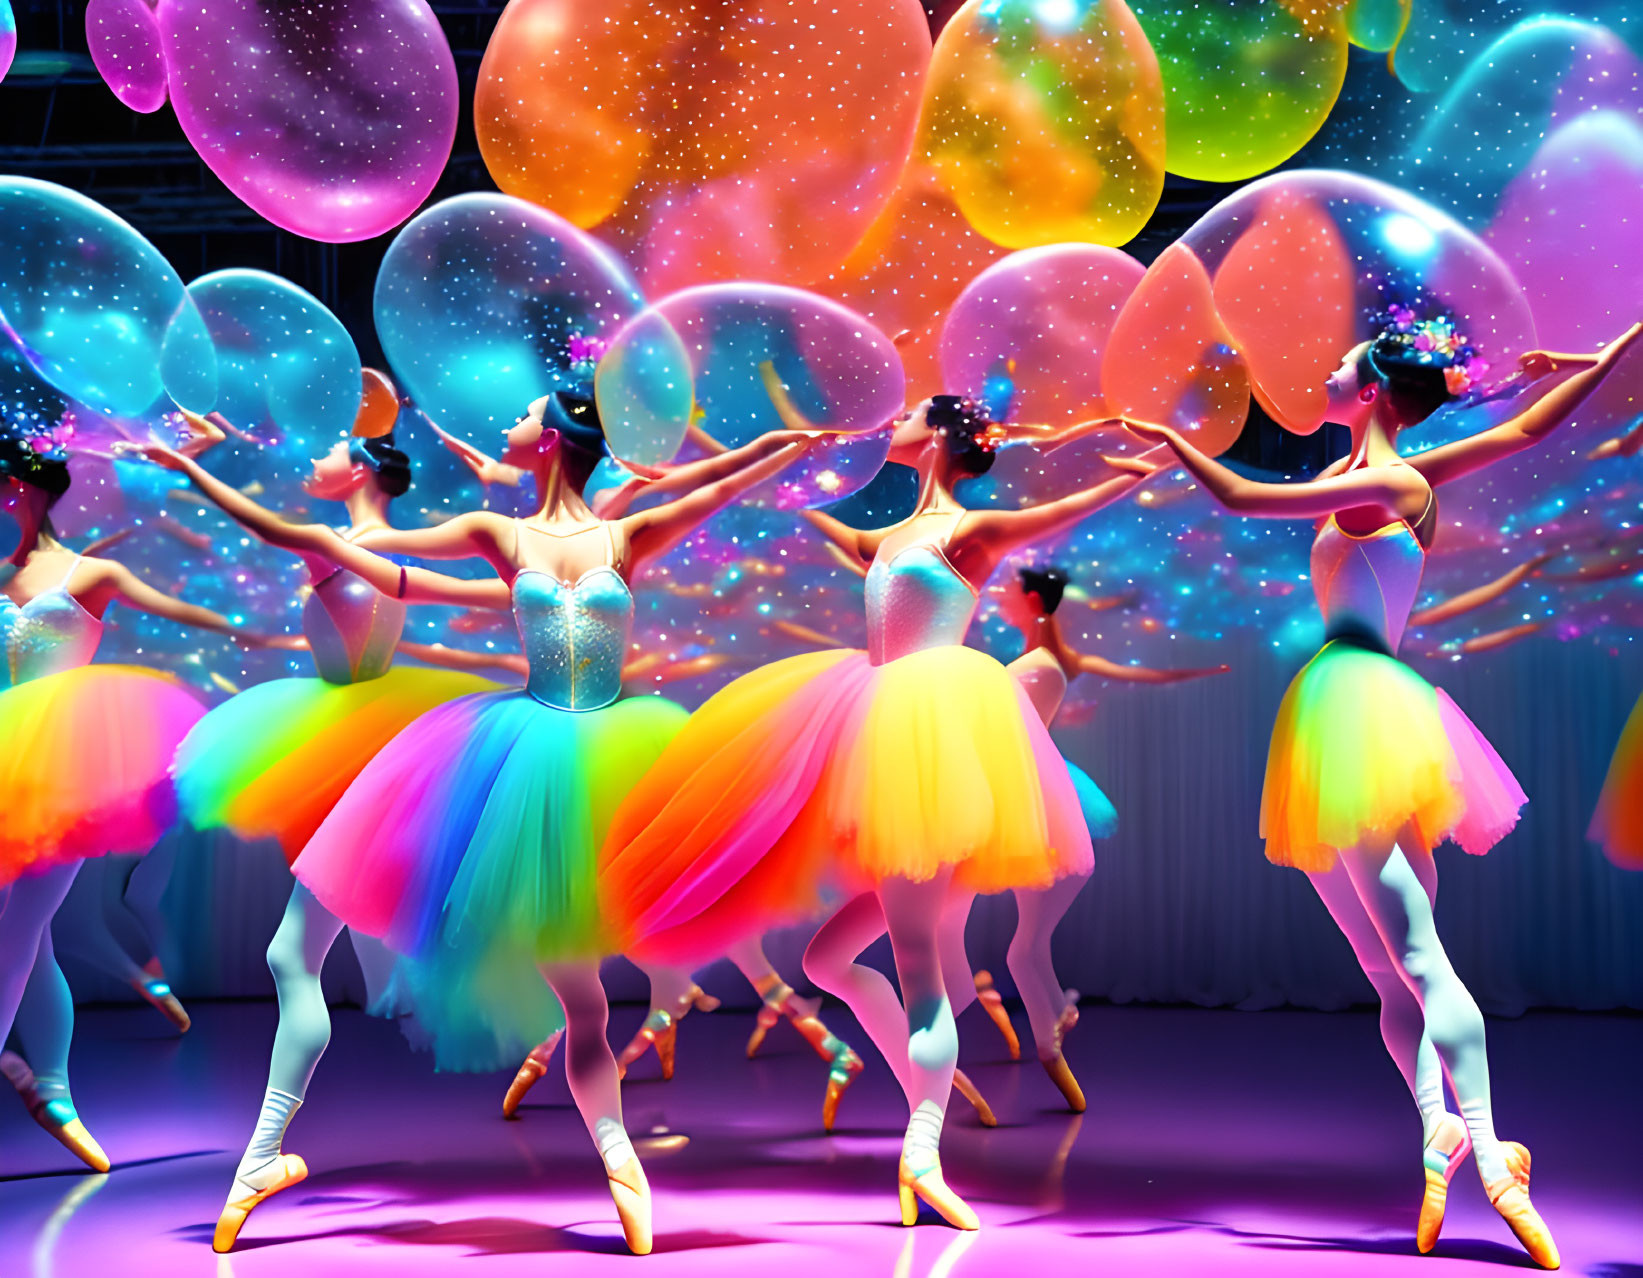 Colorful Ballet Dancers in Tutus Amid Glowing Bubbles on Cosmic Stage